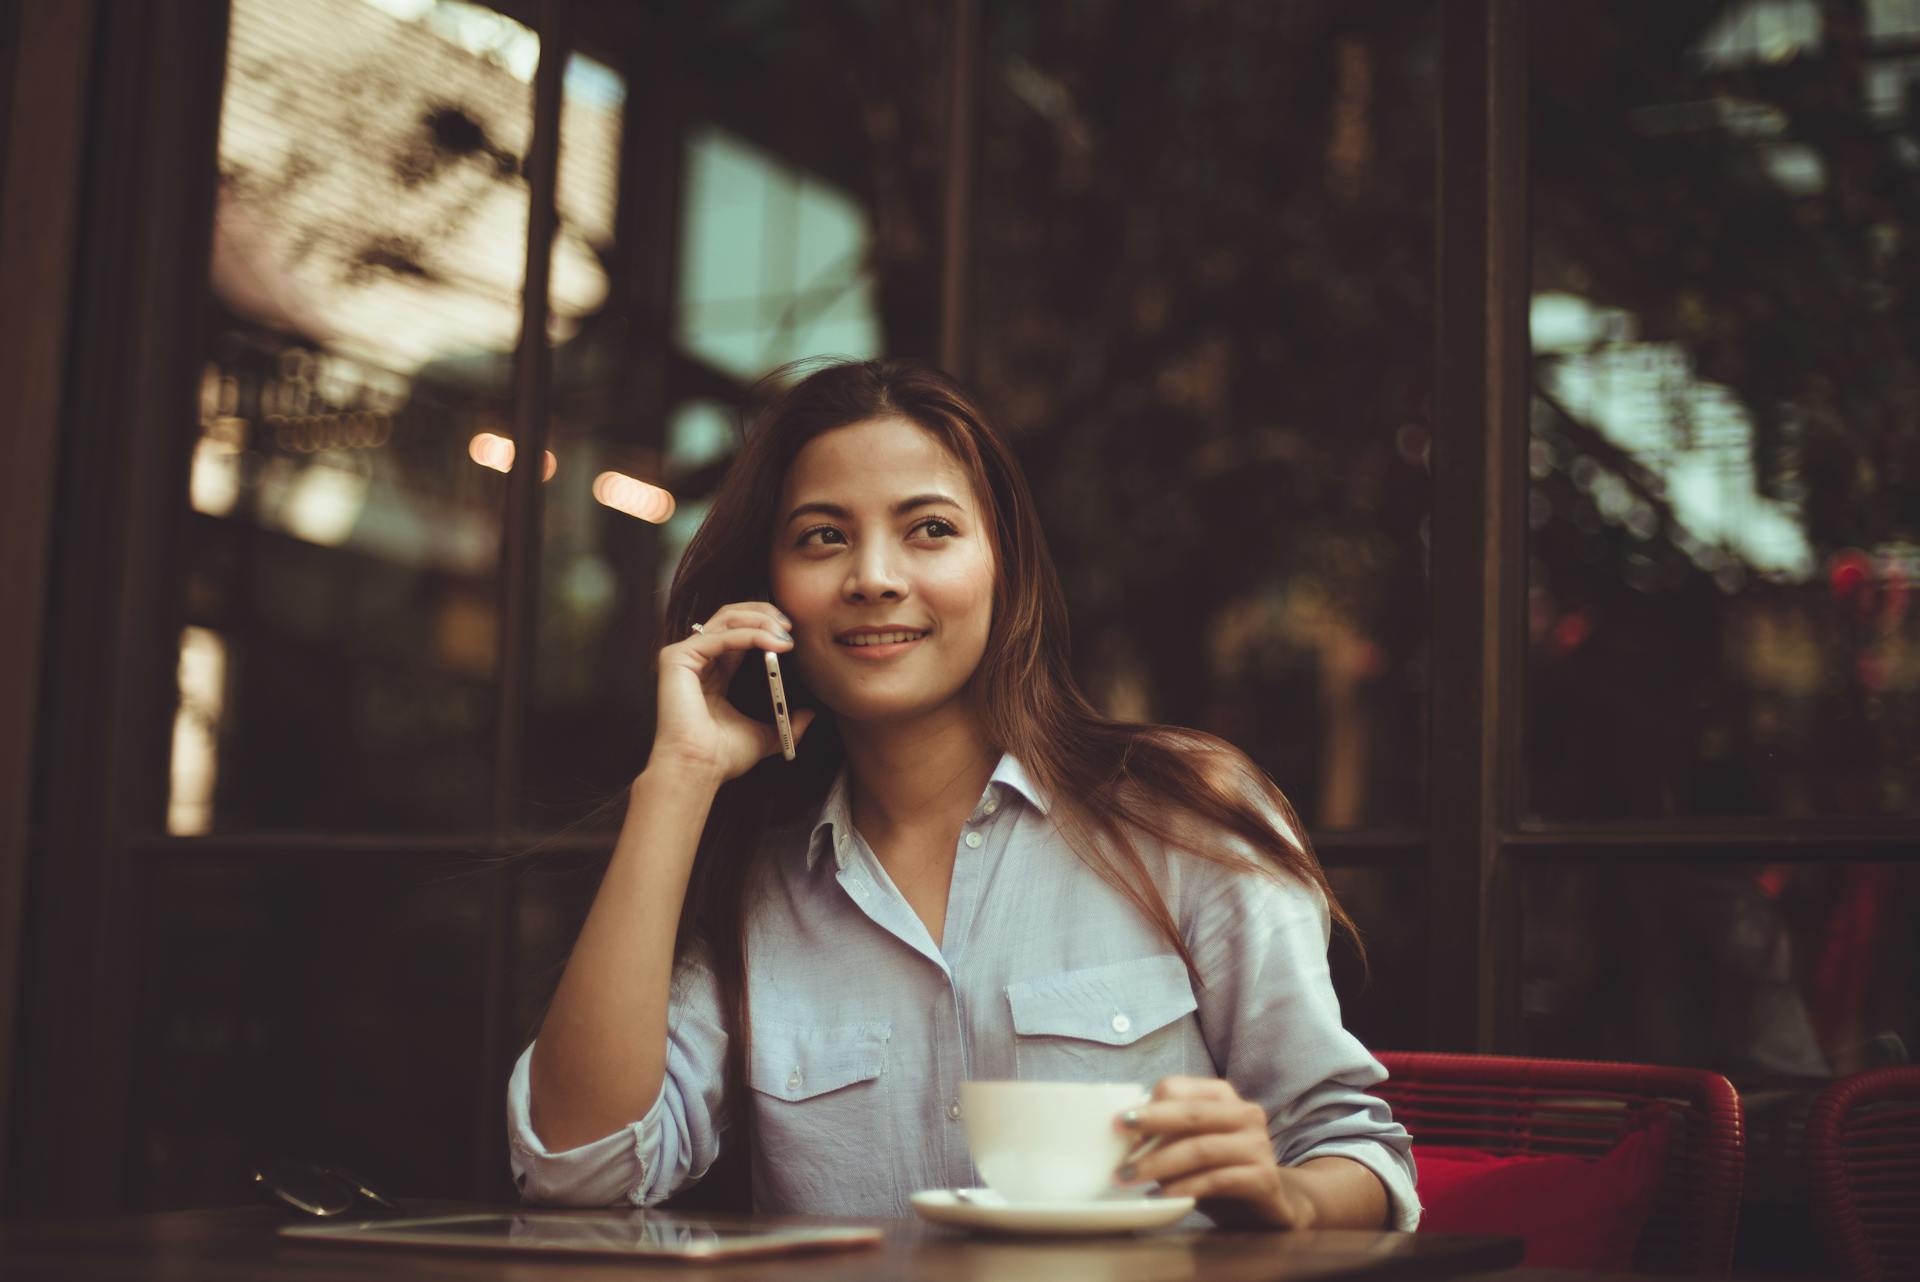 A woman on the phone | Source: Pexels